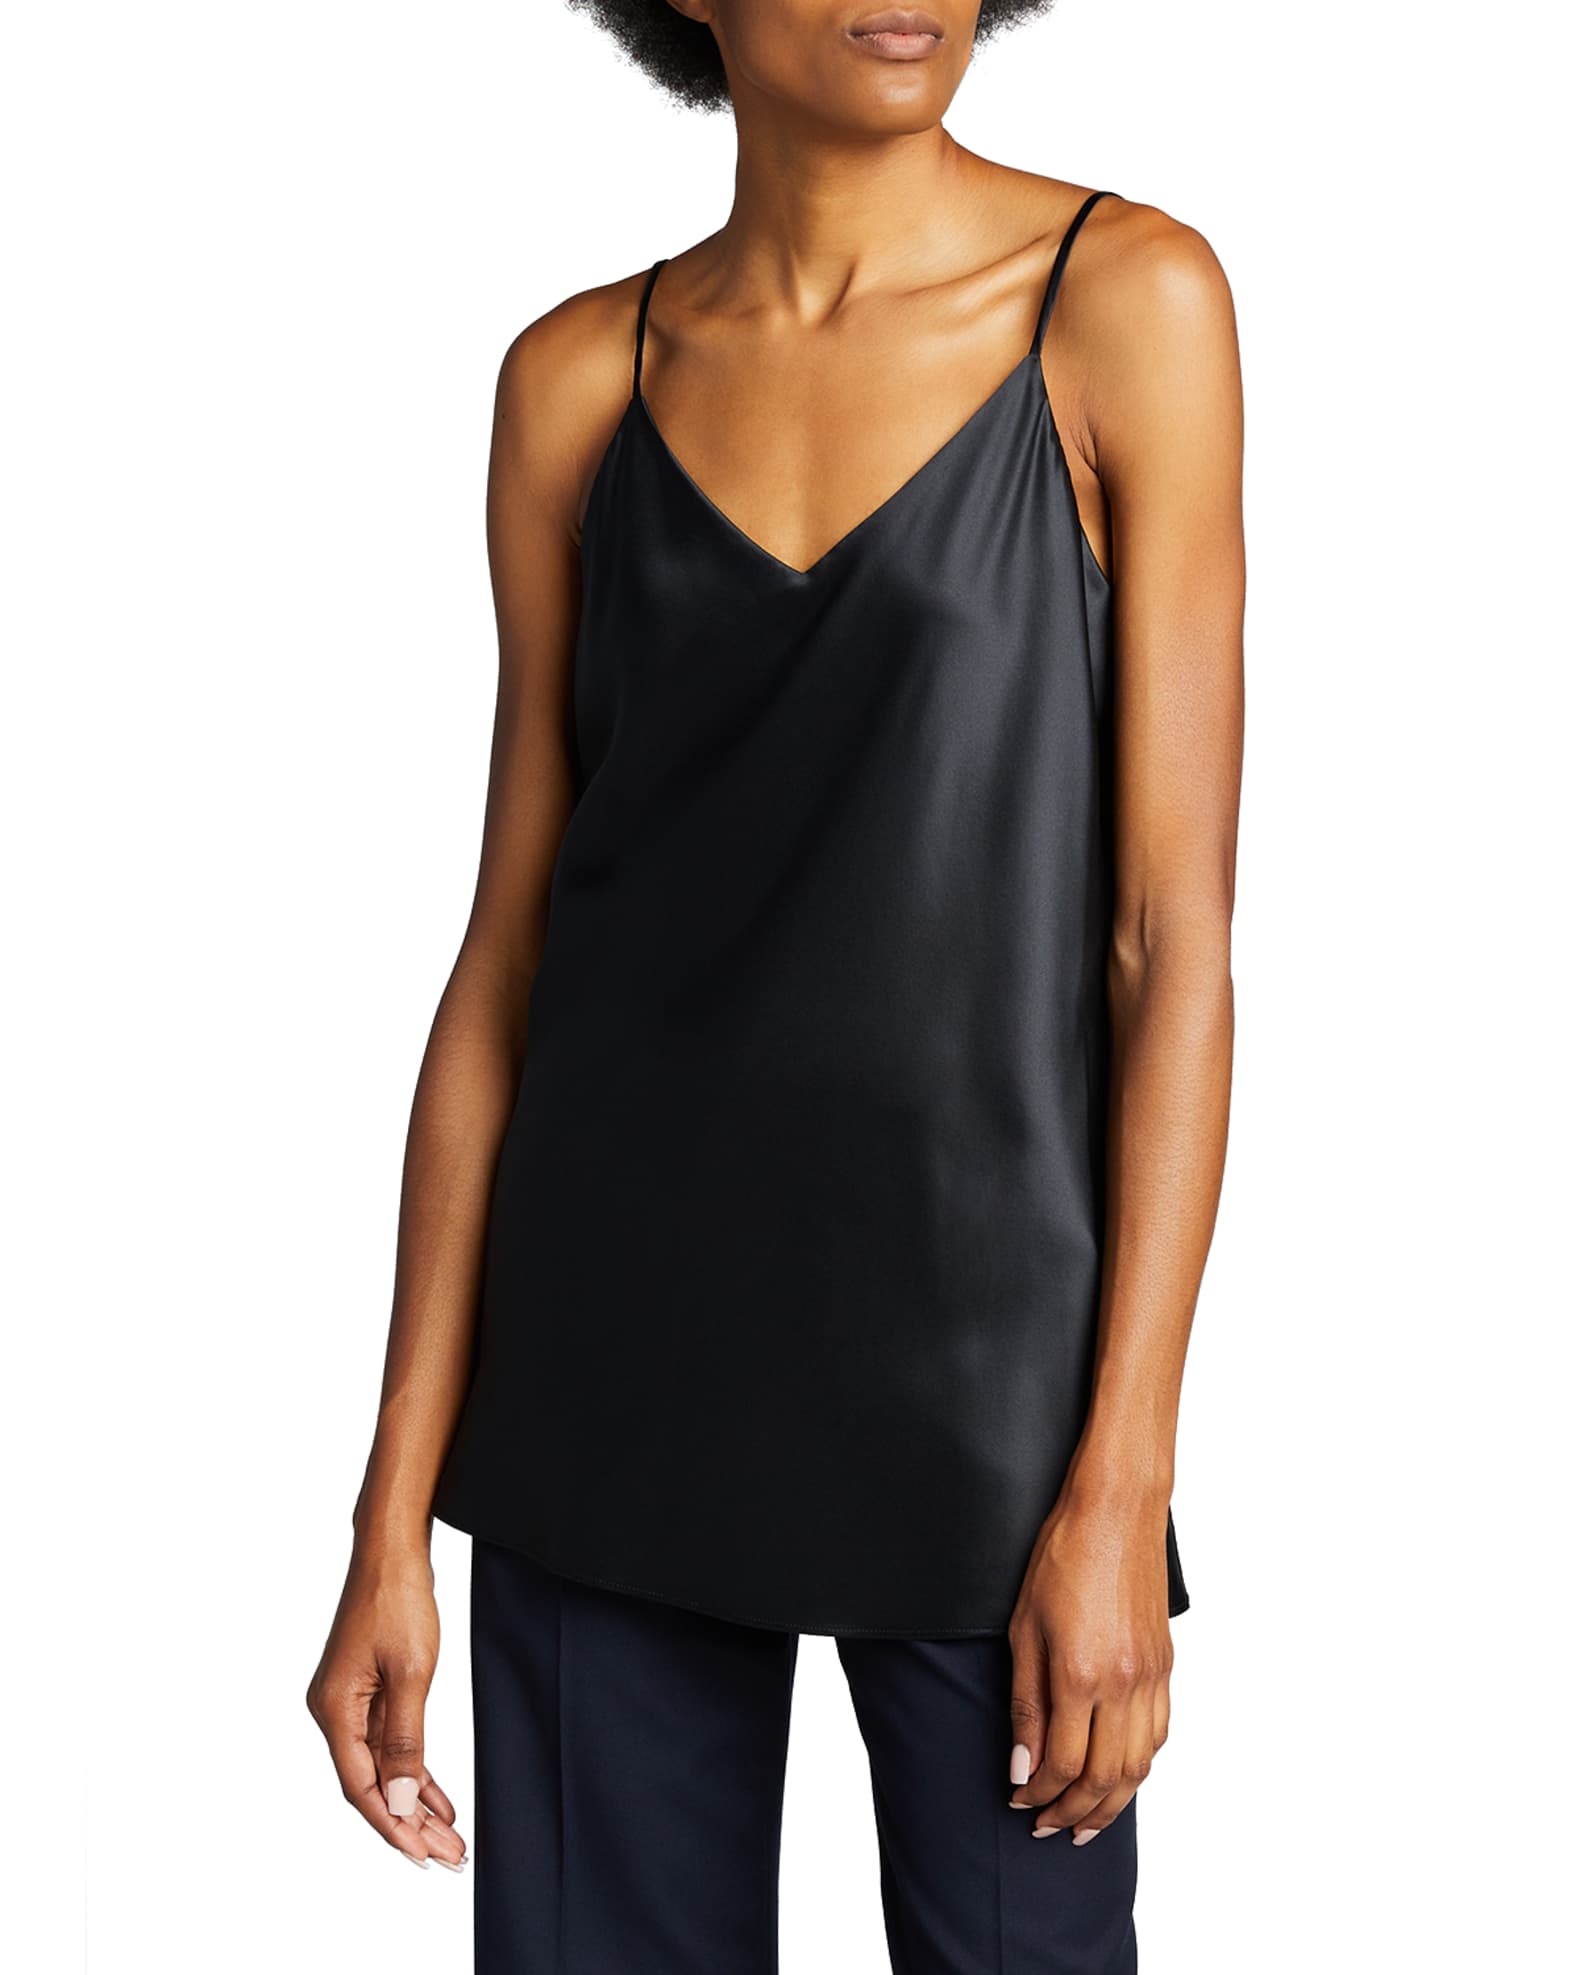 Eva Luxe Charmeuse Bias Tank and Matching Items | Neiman Marcus